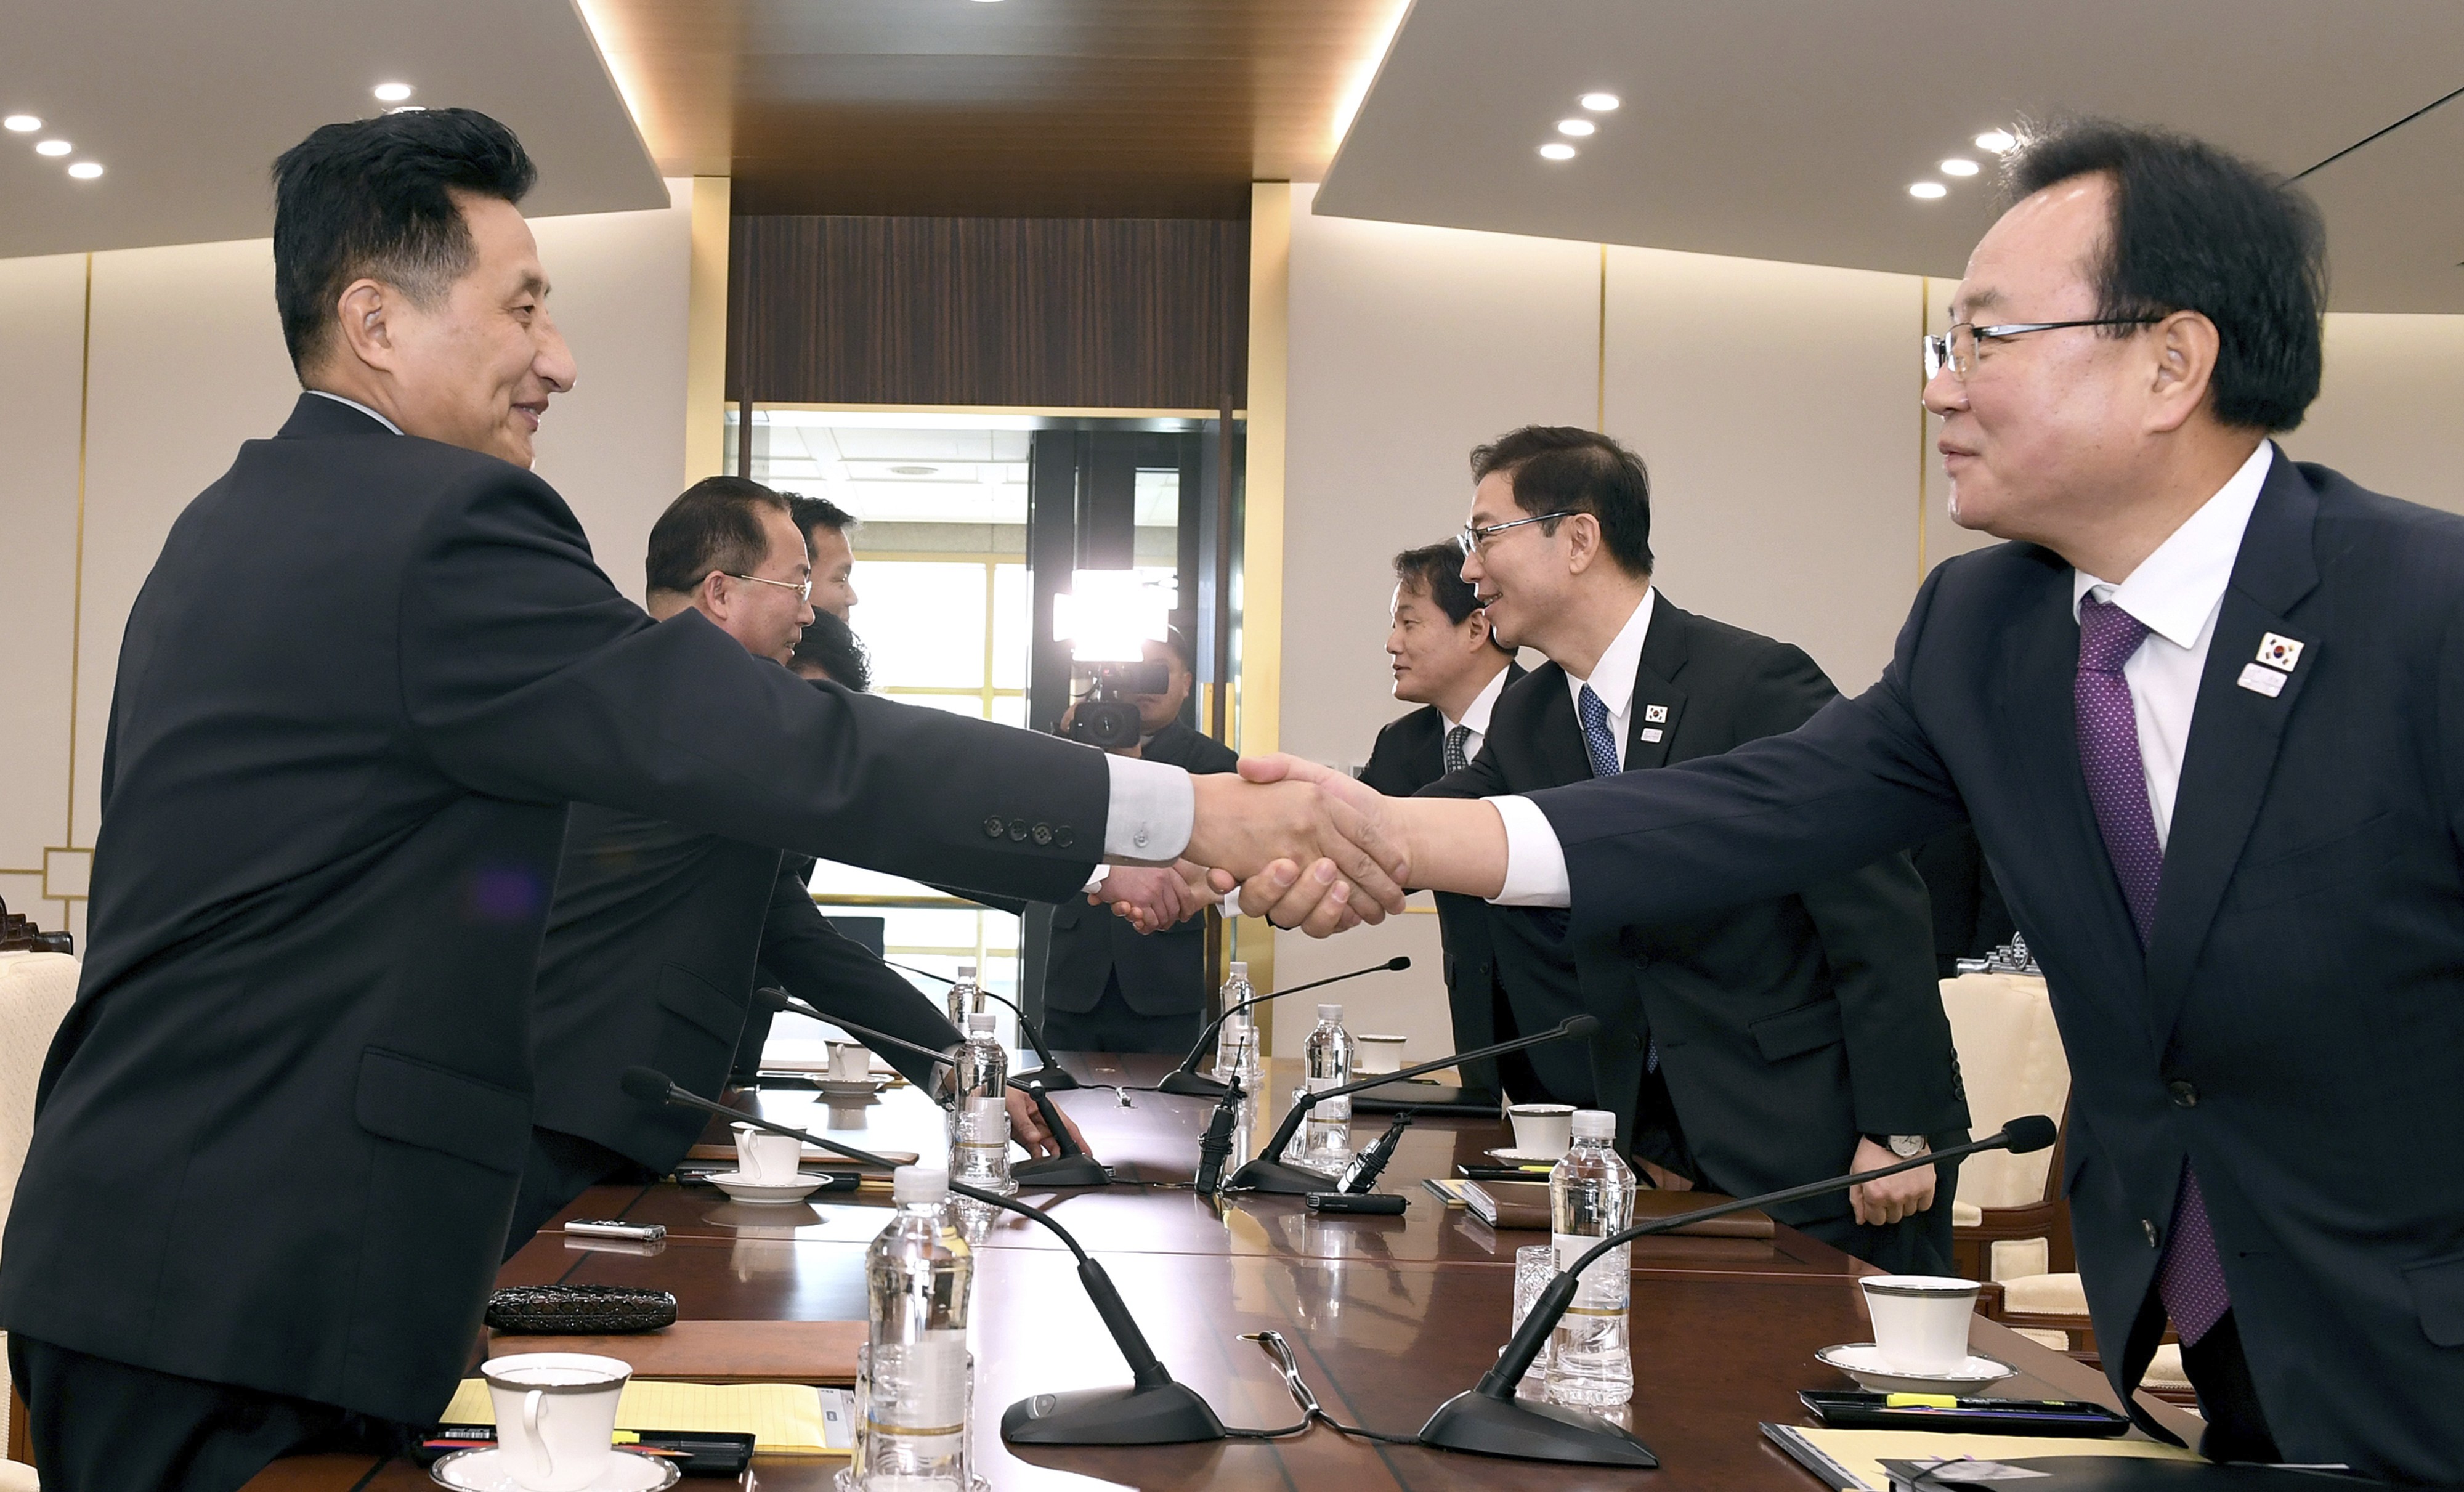 South Korean officials led by the vice-minister for unification Chun Hae-sung (centre right) shake hands with the North Korean delegation during their meeting at Panmunjom in the demilitarised zone in Paju, South Korea, on January 17. Photo: South Korean Unification Ministry via AP